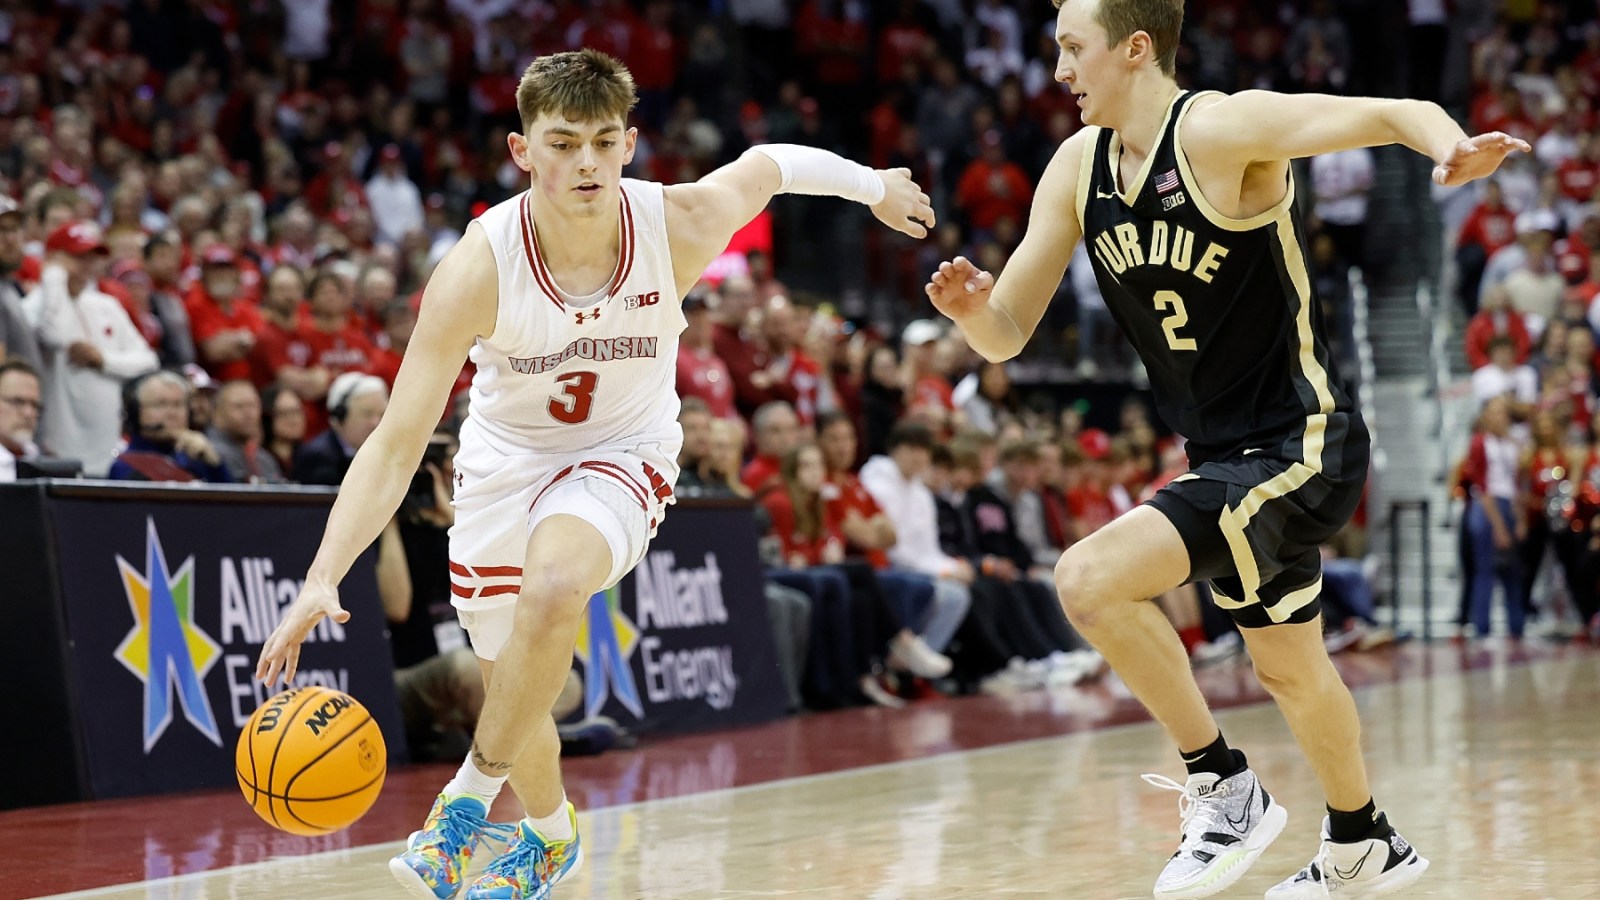 How to Watch the Wisconsin vs. Illinois Big Ten Basketball Championship Online